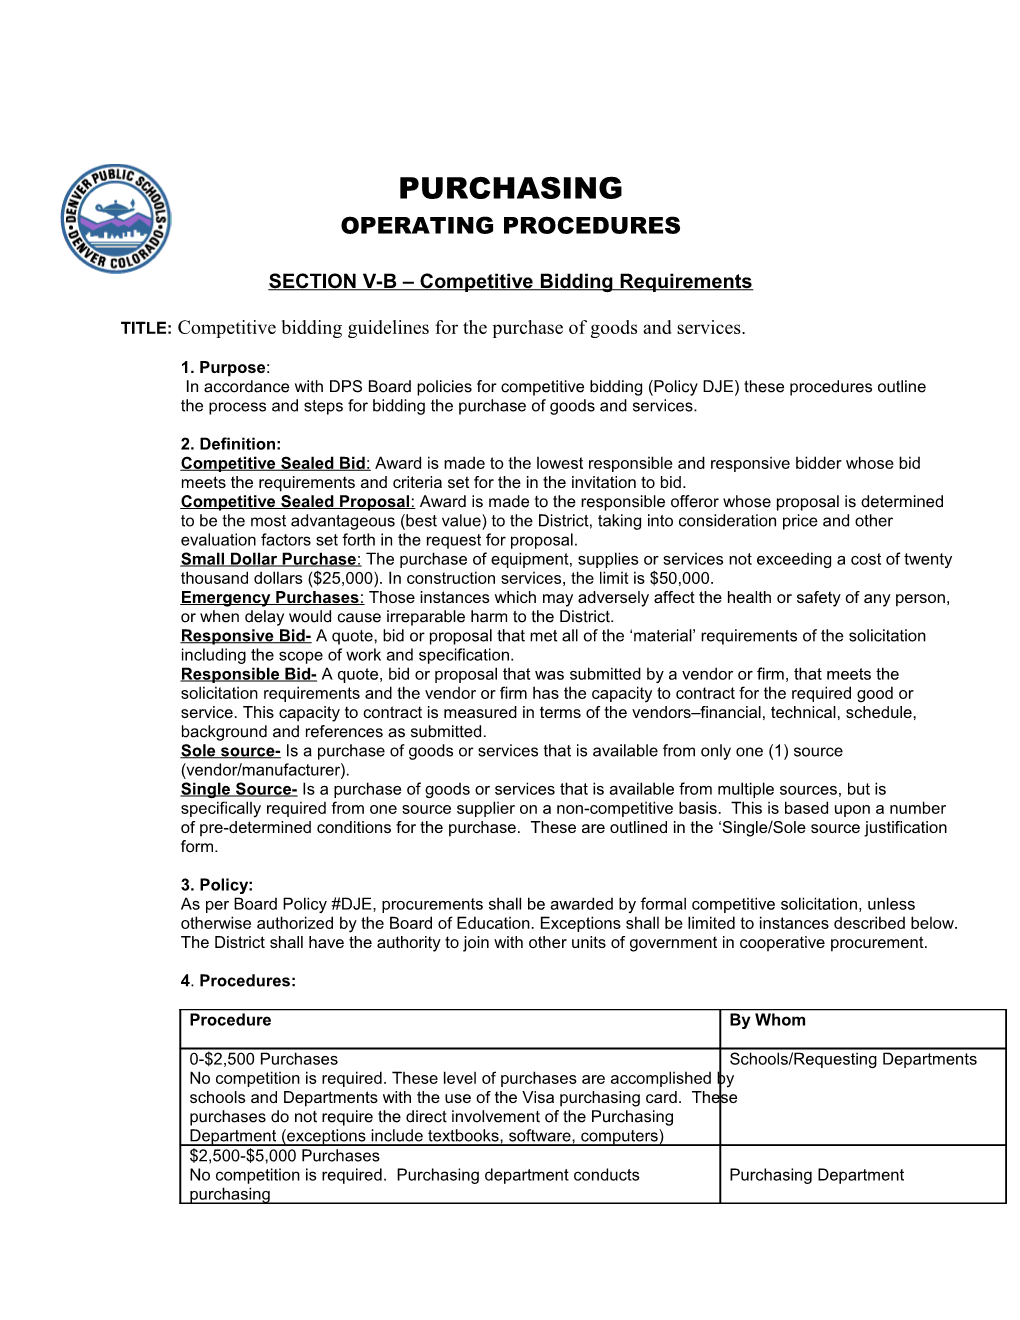 SECTION V-B Competitive Bidding Requirements